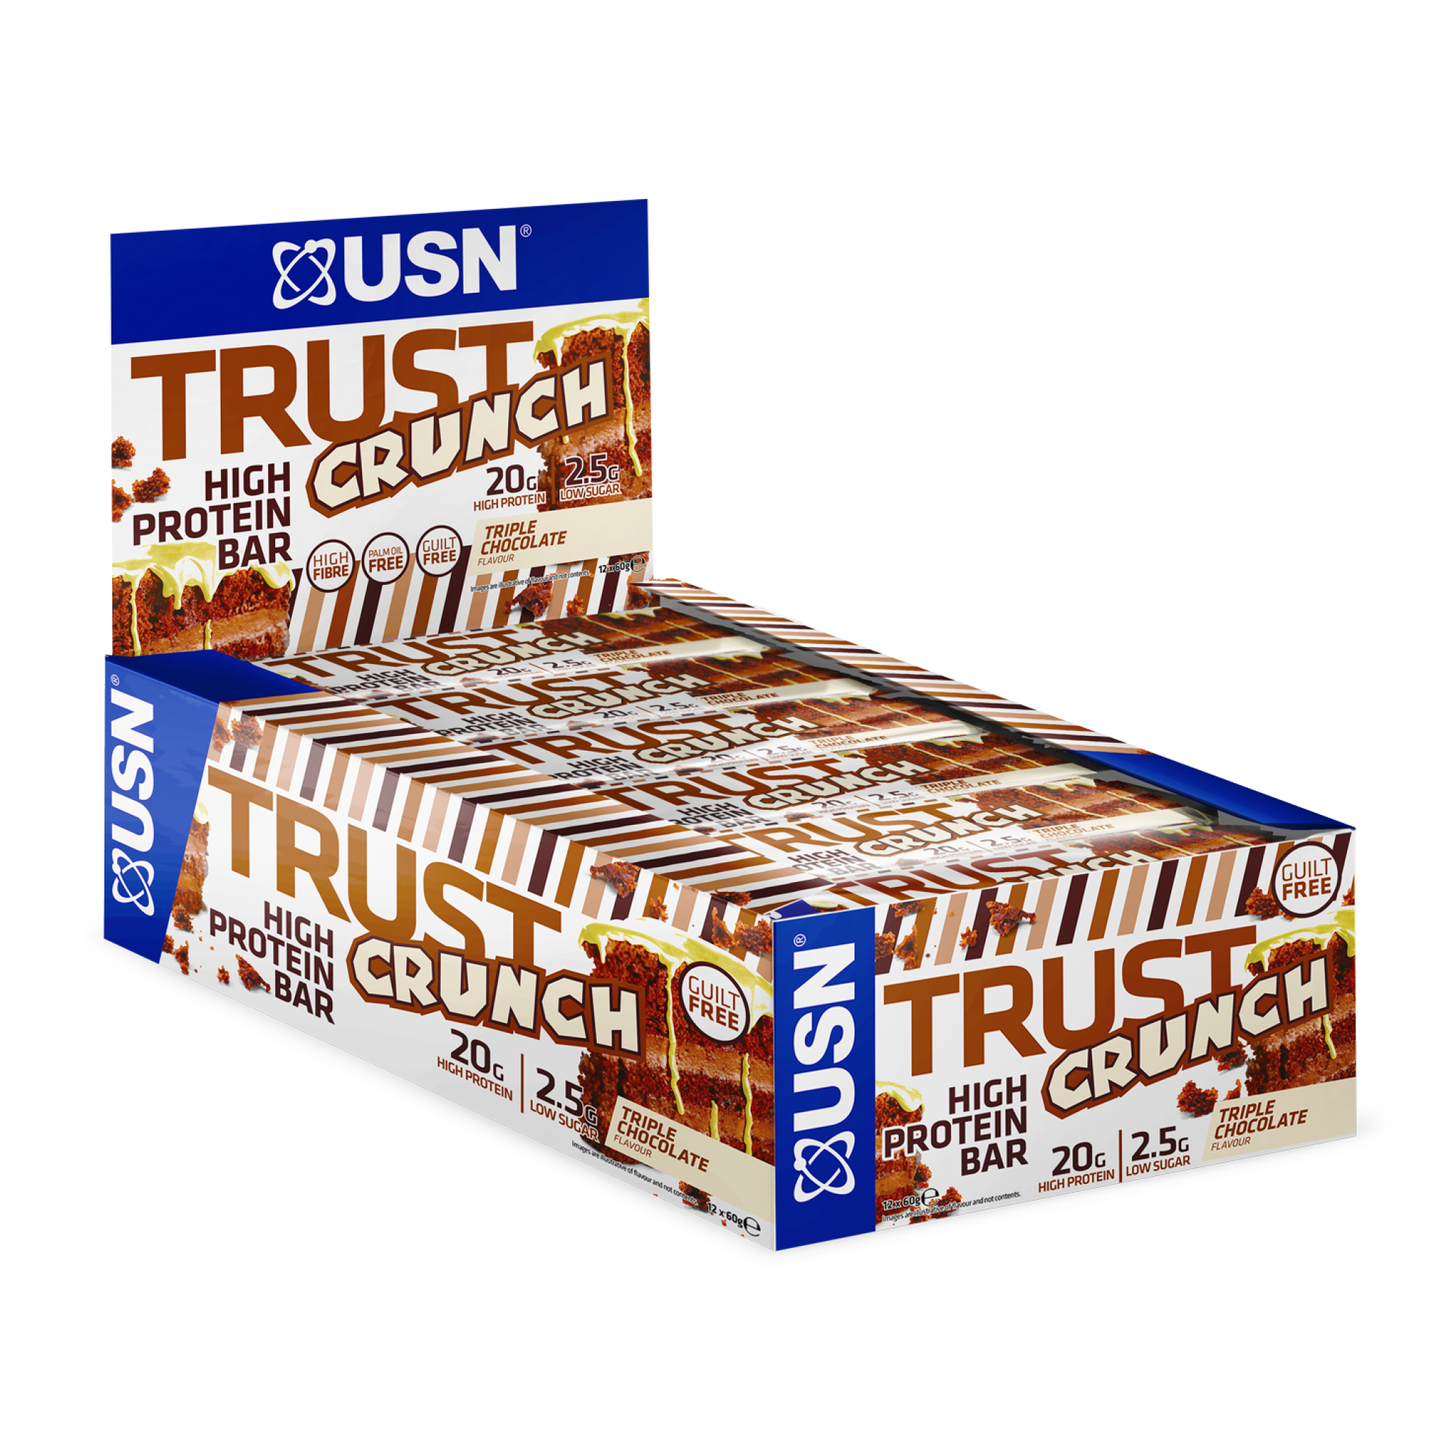 Trust Crunch Bar Raspberry Cheese Cake Flavour - Low Calorie High Protein Snack (12 x 60g)